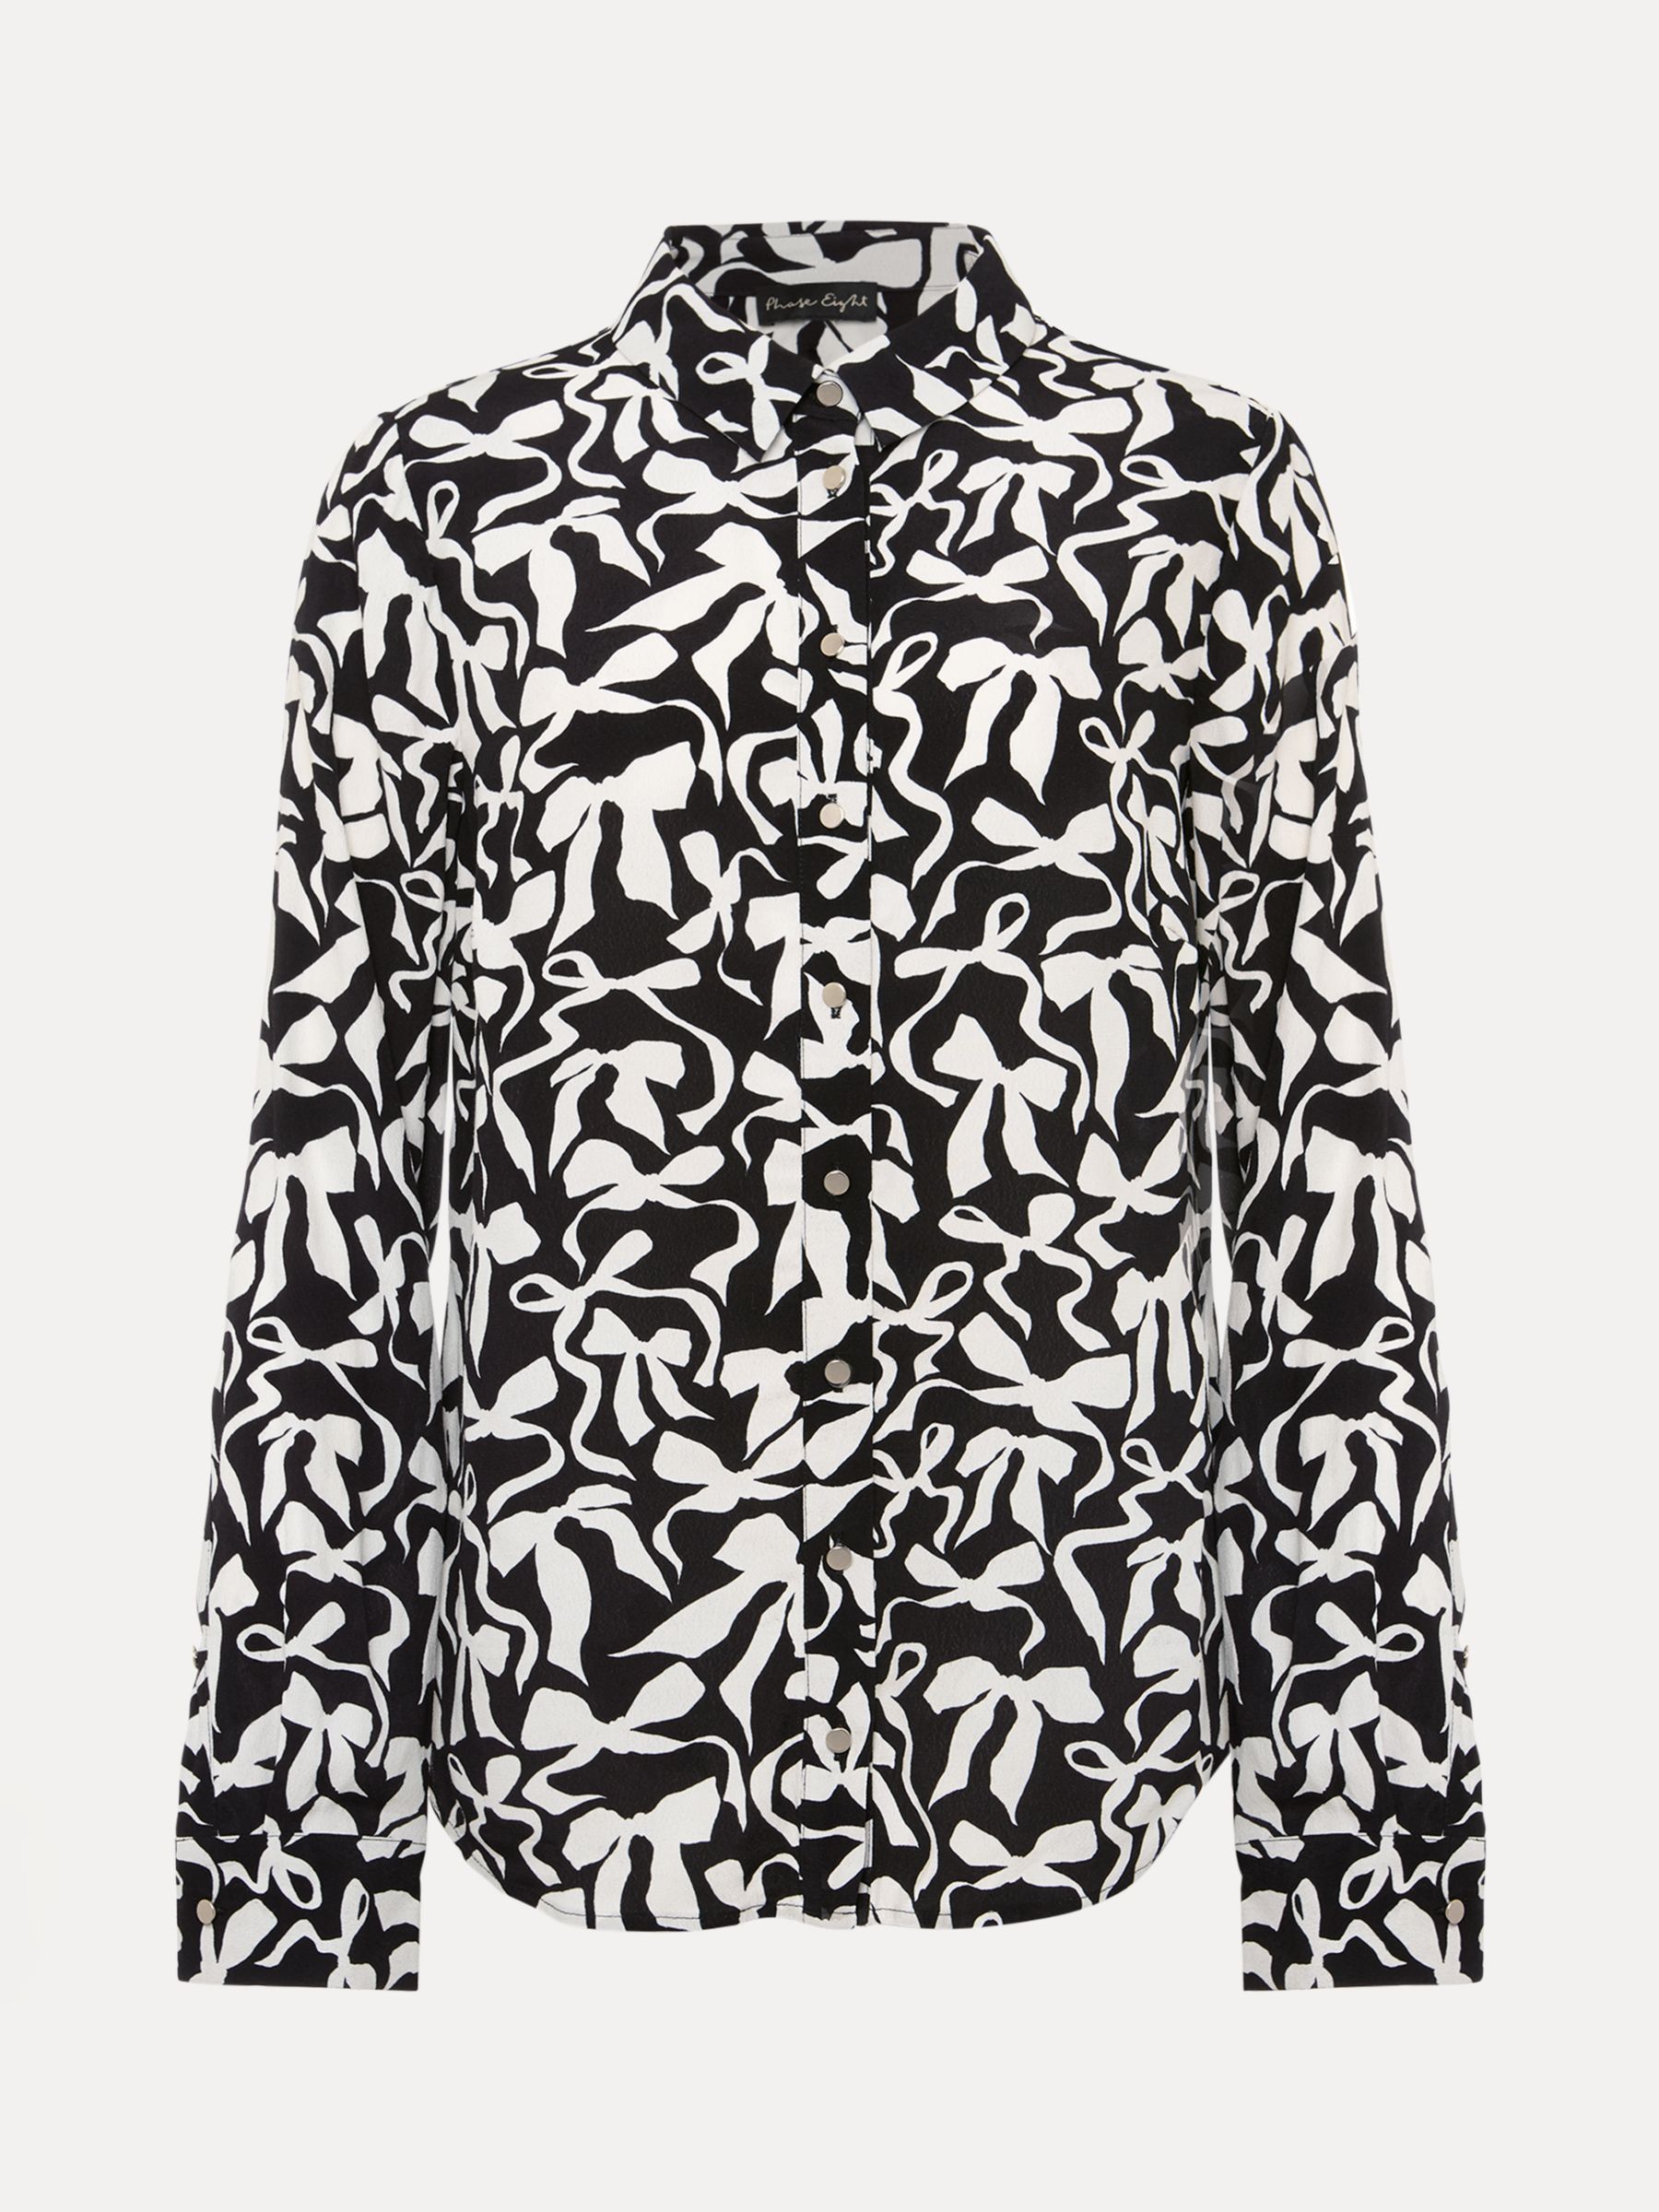 Buy Phase Eight Era Abstract Monochrome Bow Print Shirt, Black/Ivory Online at johnlewis.com